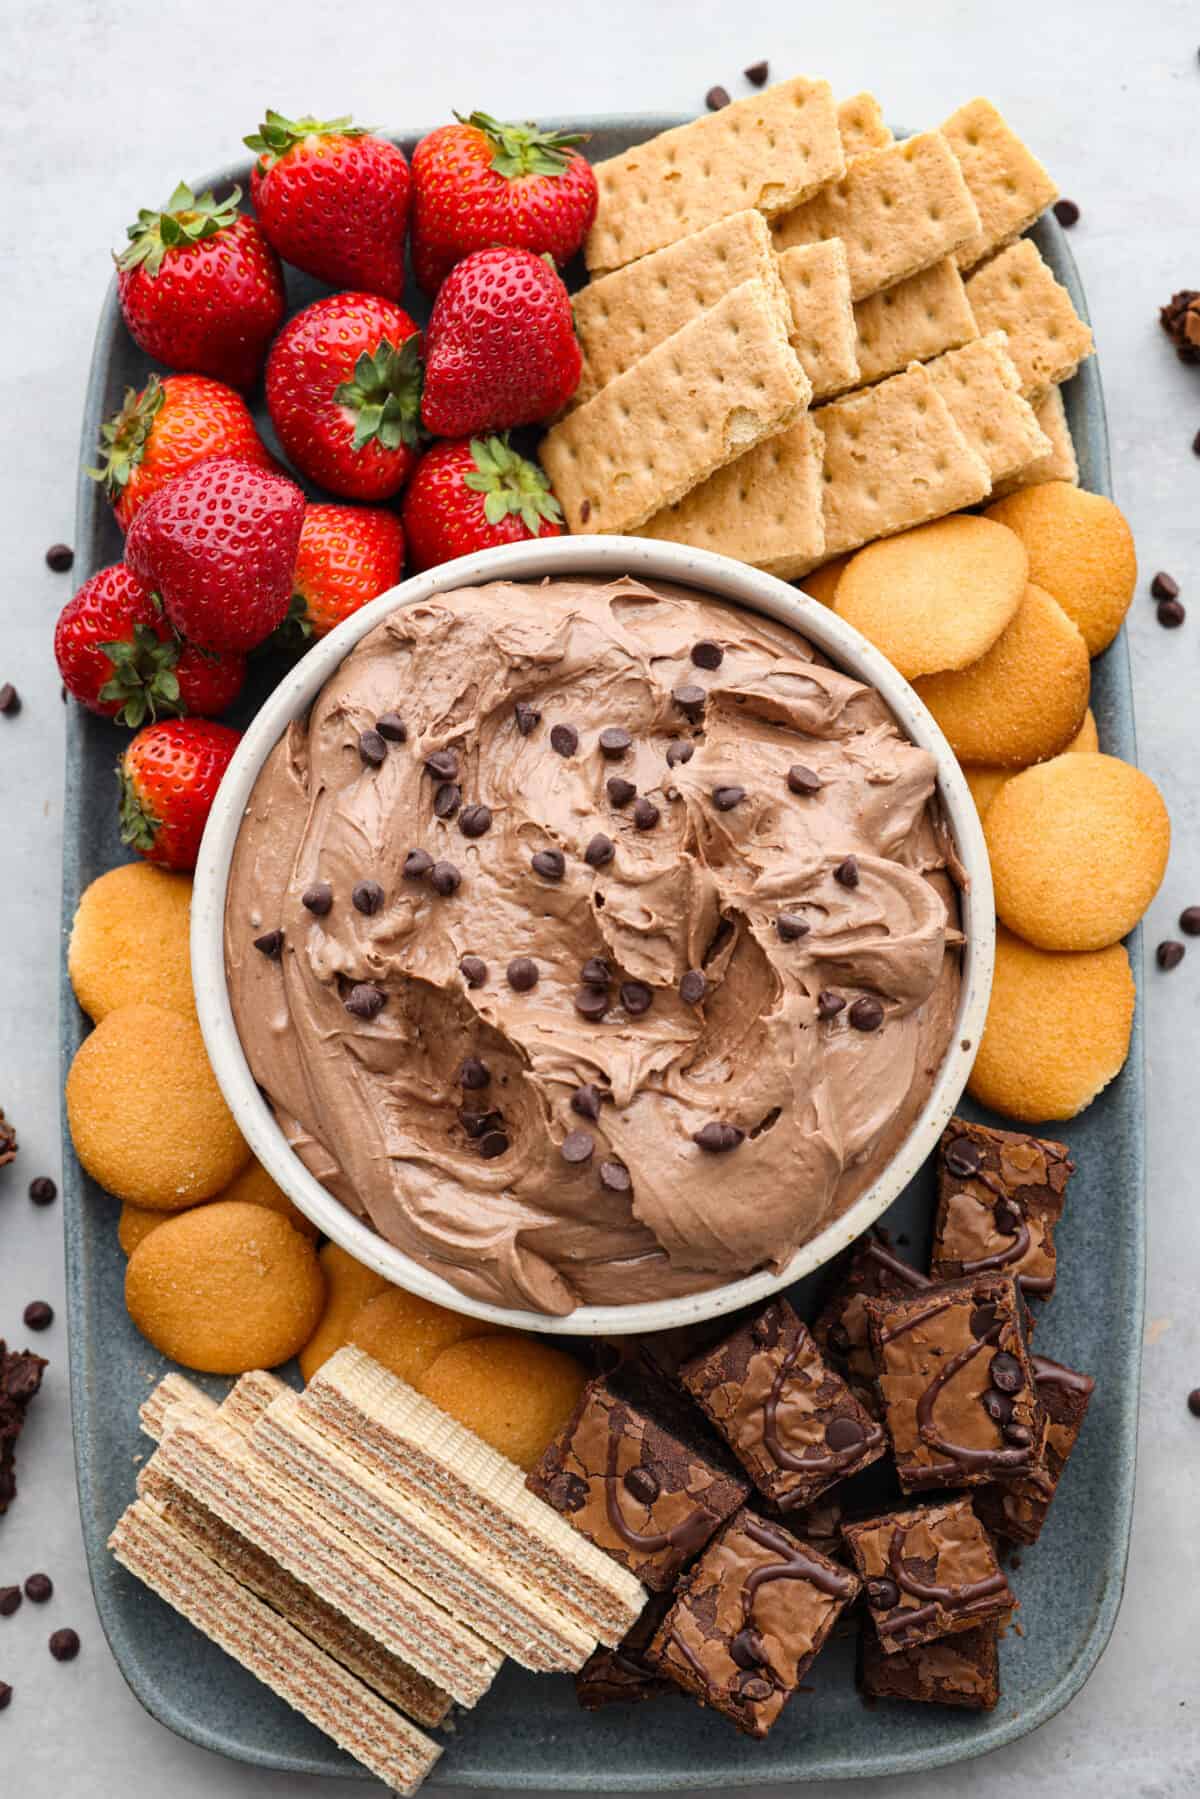 Top-down view of brownie batter dip in a white bowl. It is surrounded by a variety of cookies, cut brownies, wafers, and fruit for dipping. Everything is served on a blue-gray stoneware serving dish.